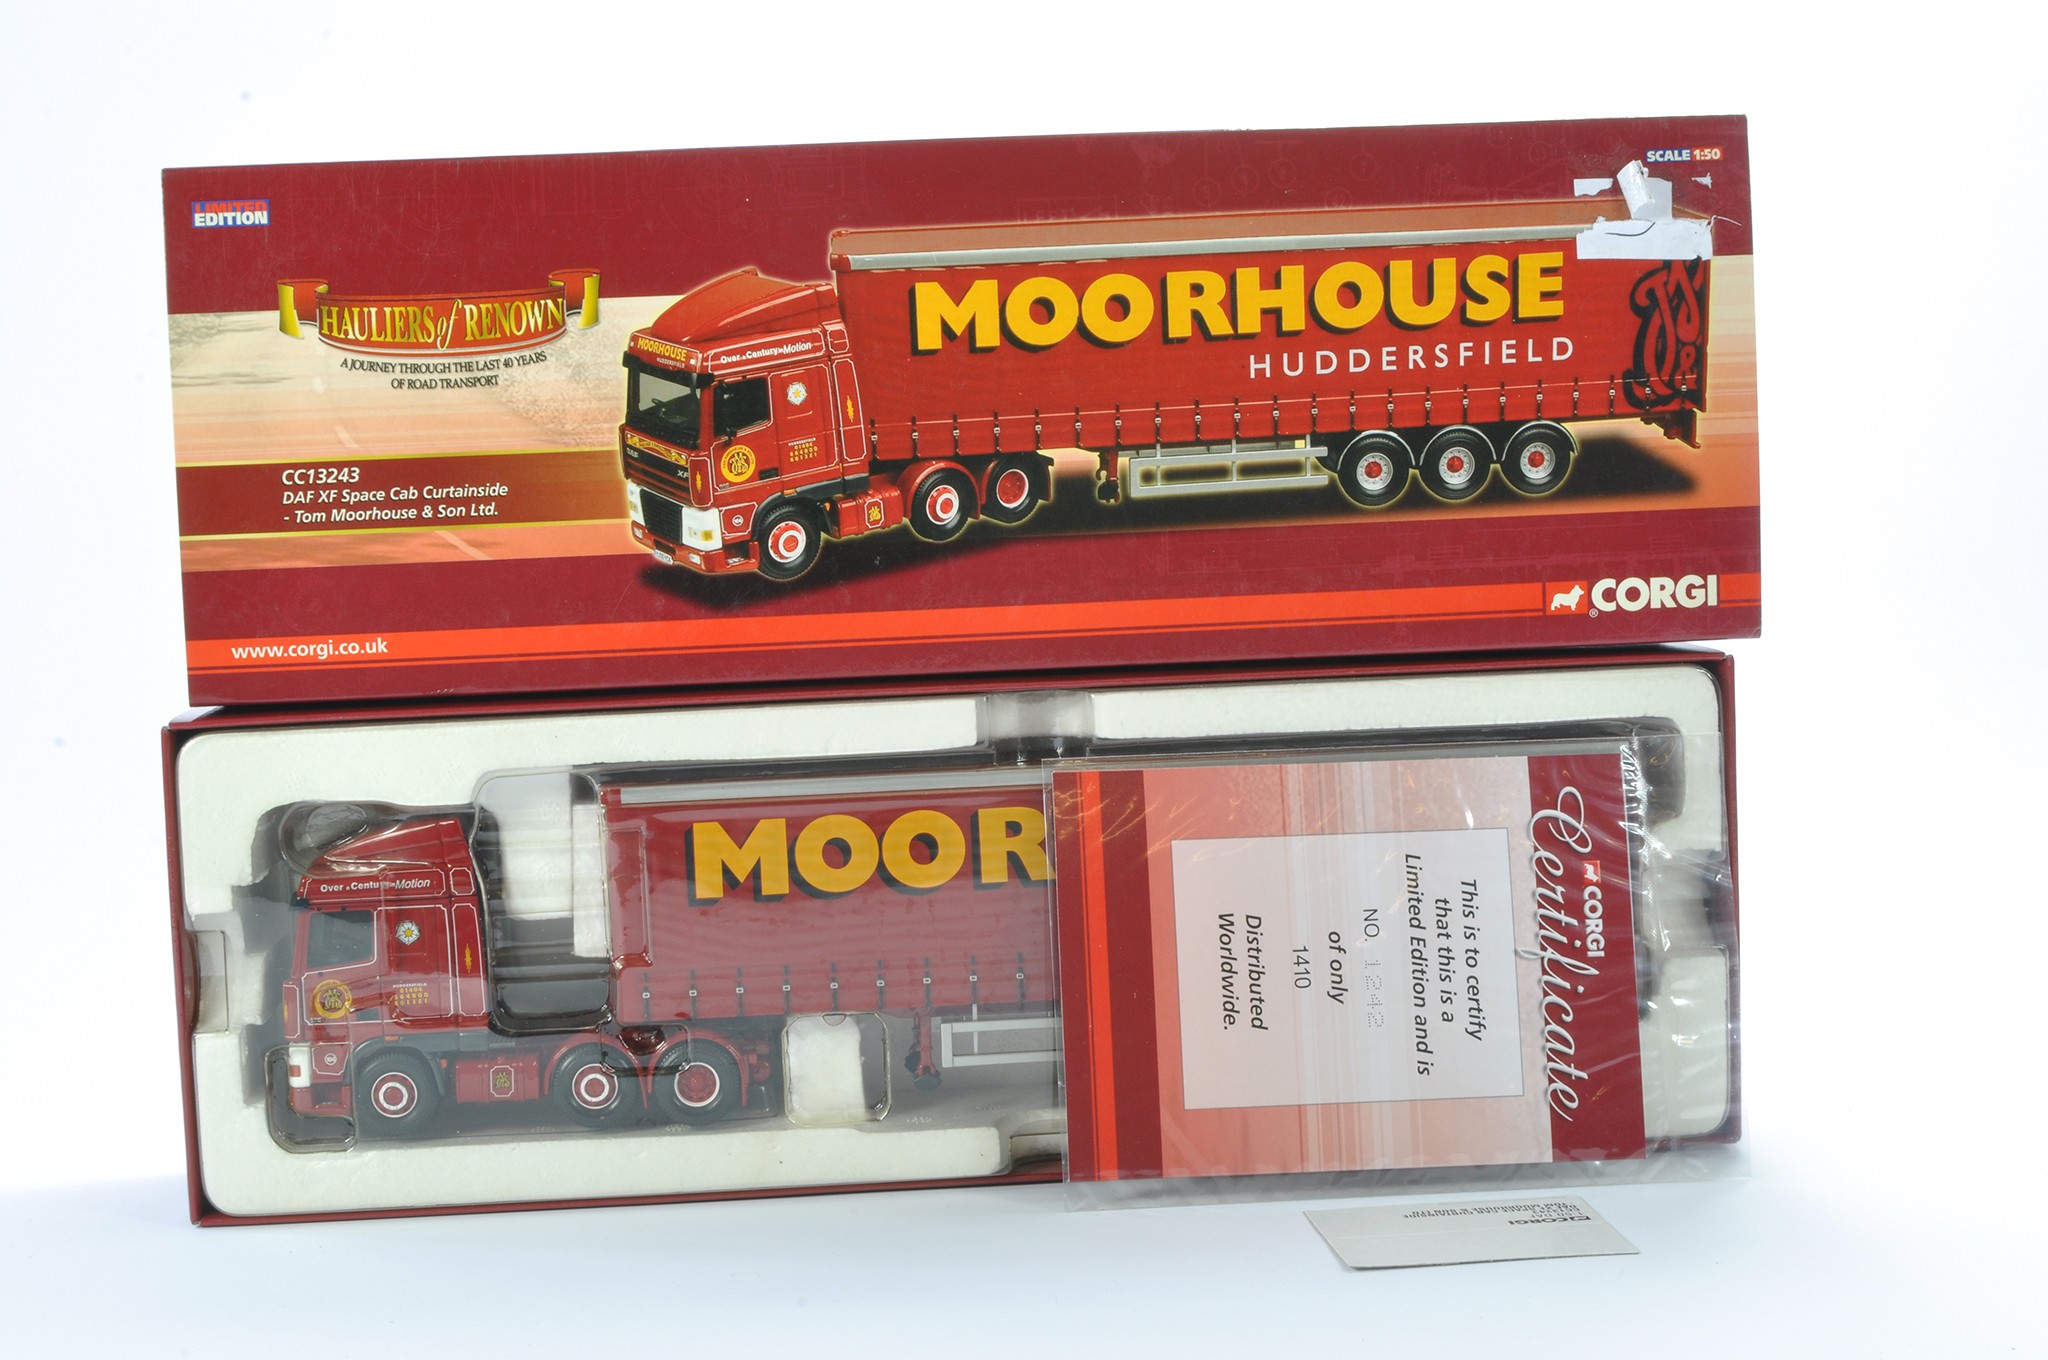 Corgi Model Truck Issue comprising No. CC13243 DAF XF Space Cab Curtainside in the livery of Tom